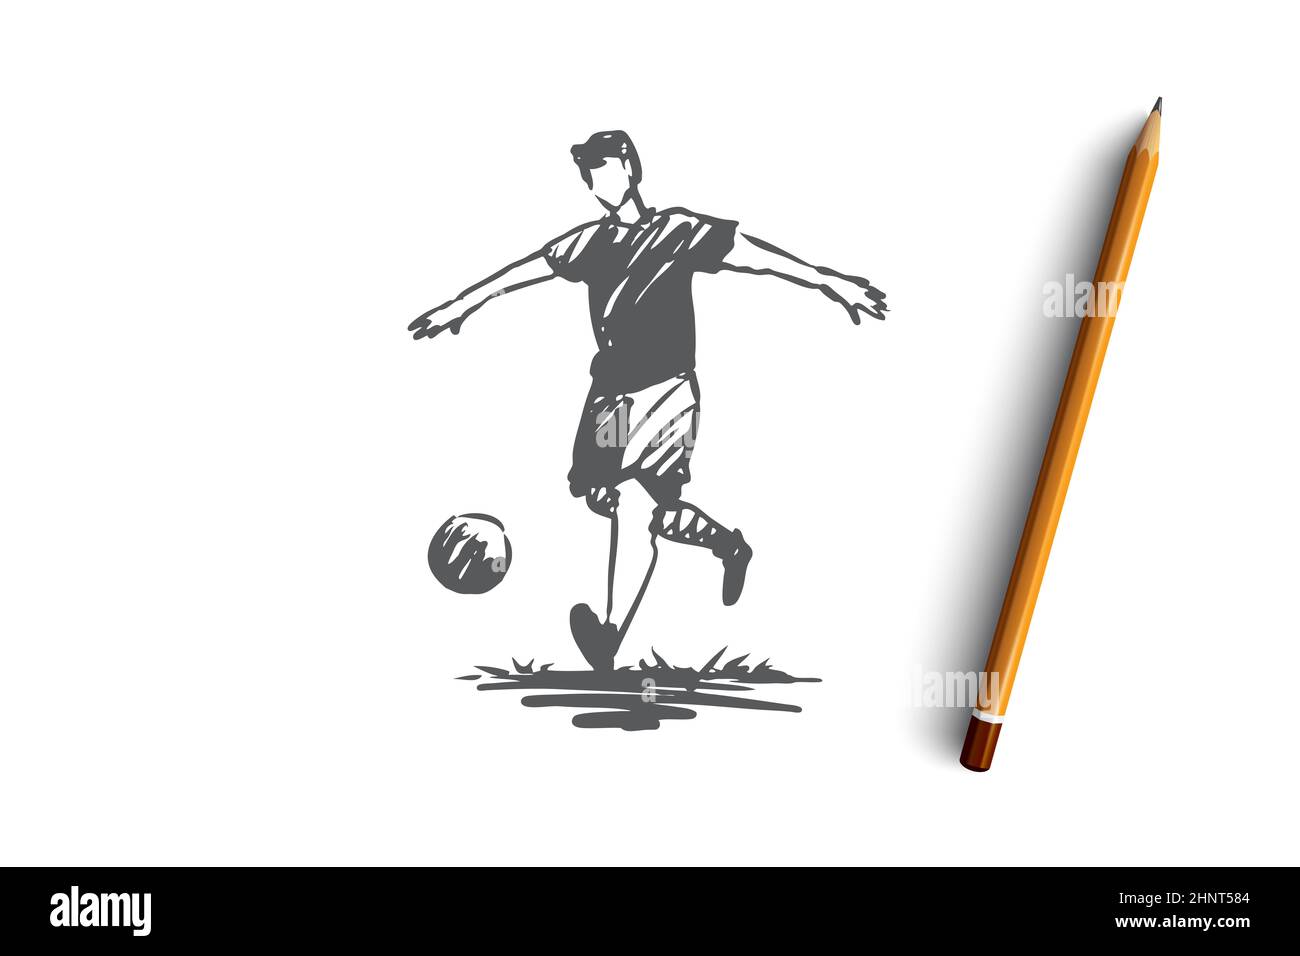 Football player team game soccer sports activity hand drawn stickman  cartoon doodle sketch vector graphic illustration  CanStock